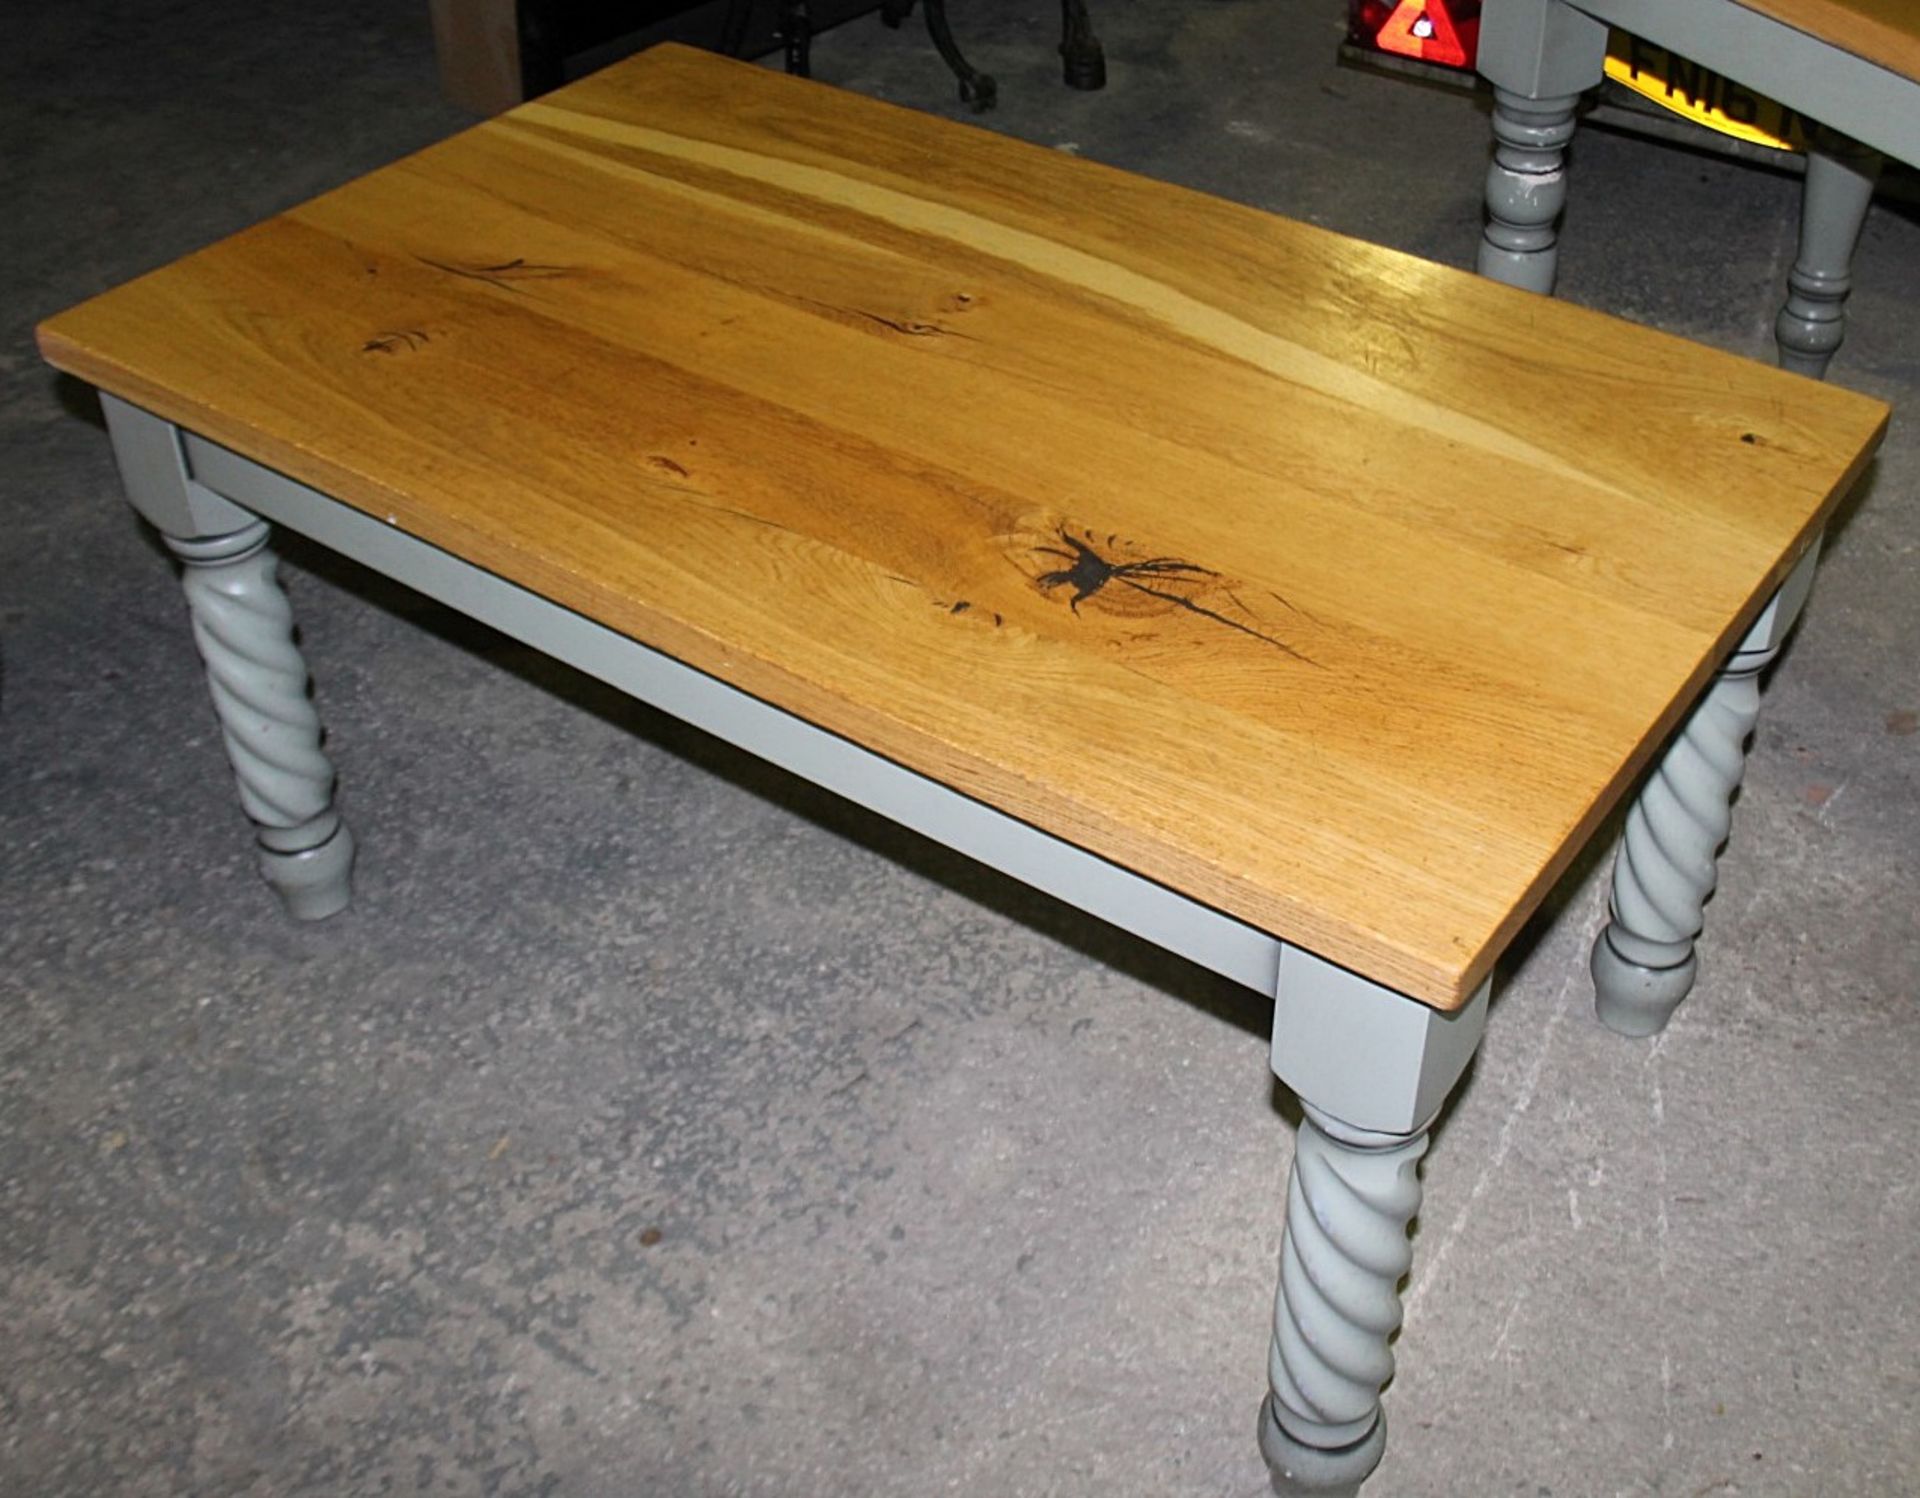 1 x Solid Wood Farmhouse Low Coffee Table - Features A Solid Oak Table Top - Image 4 of 4